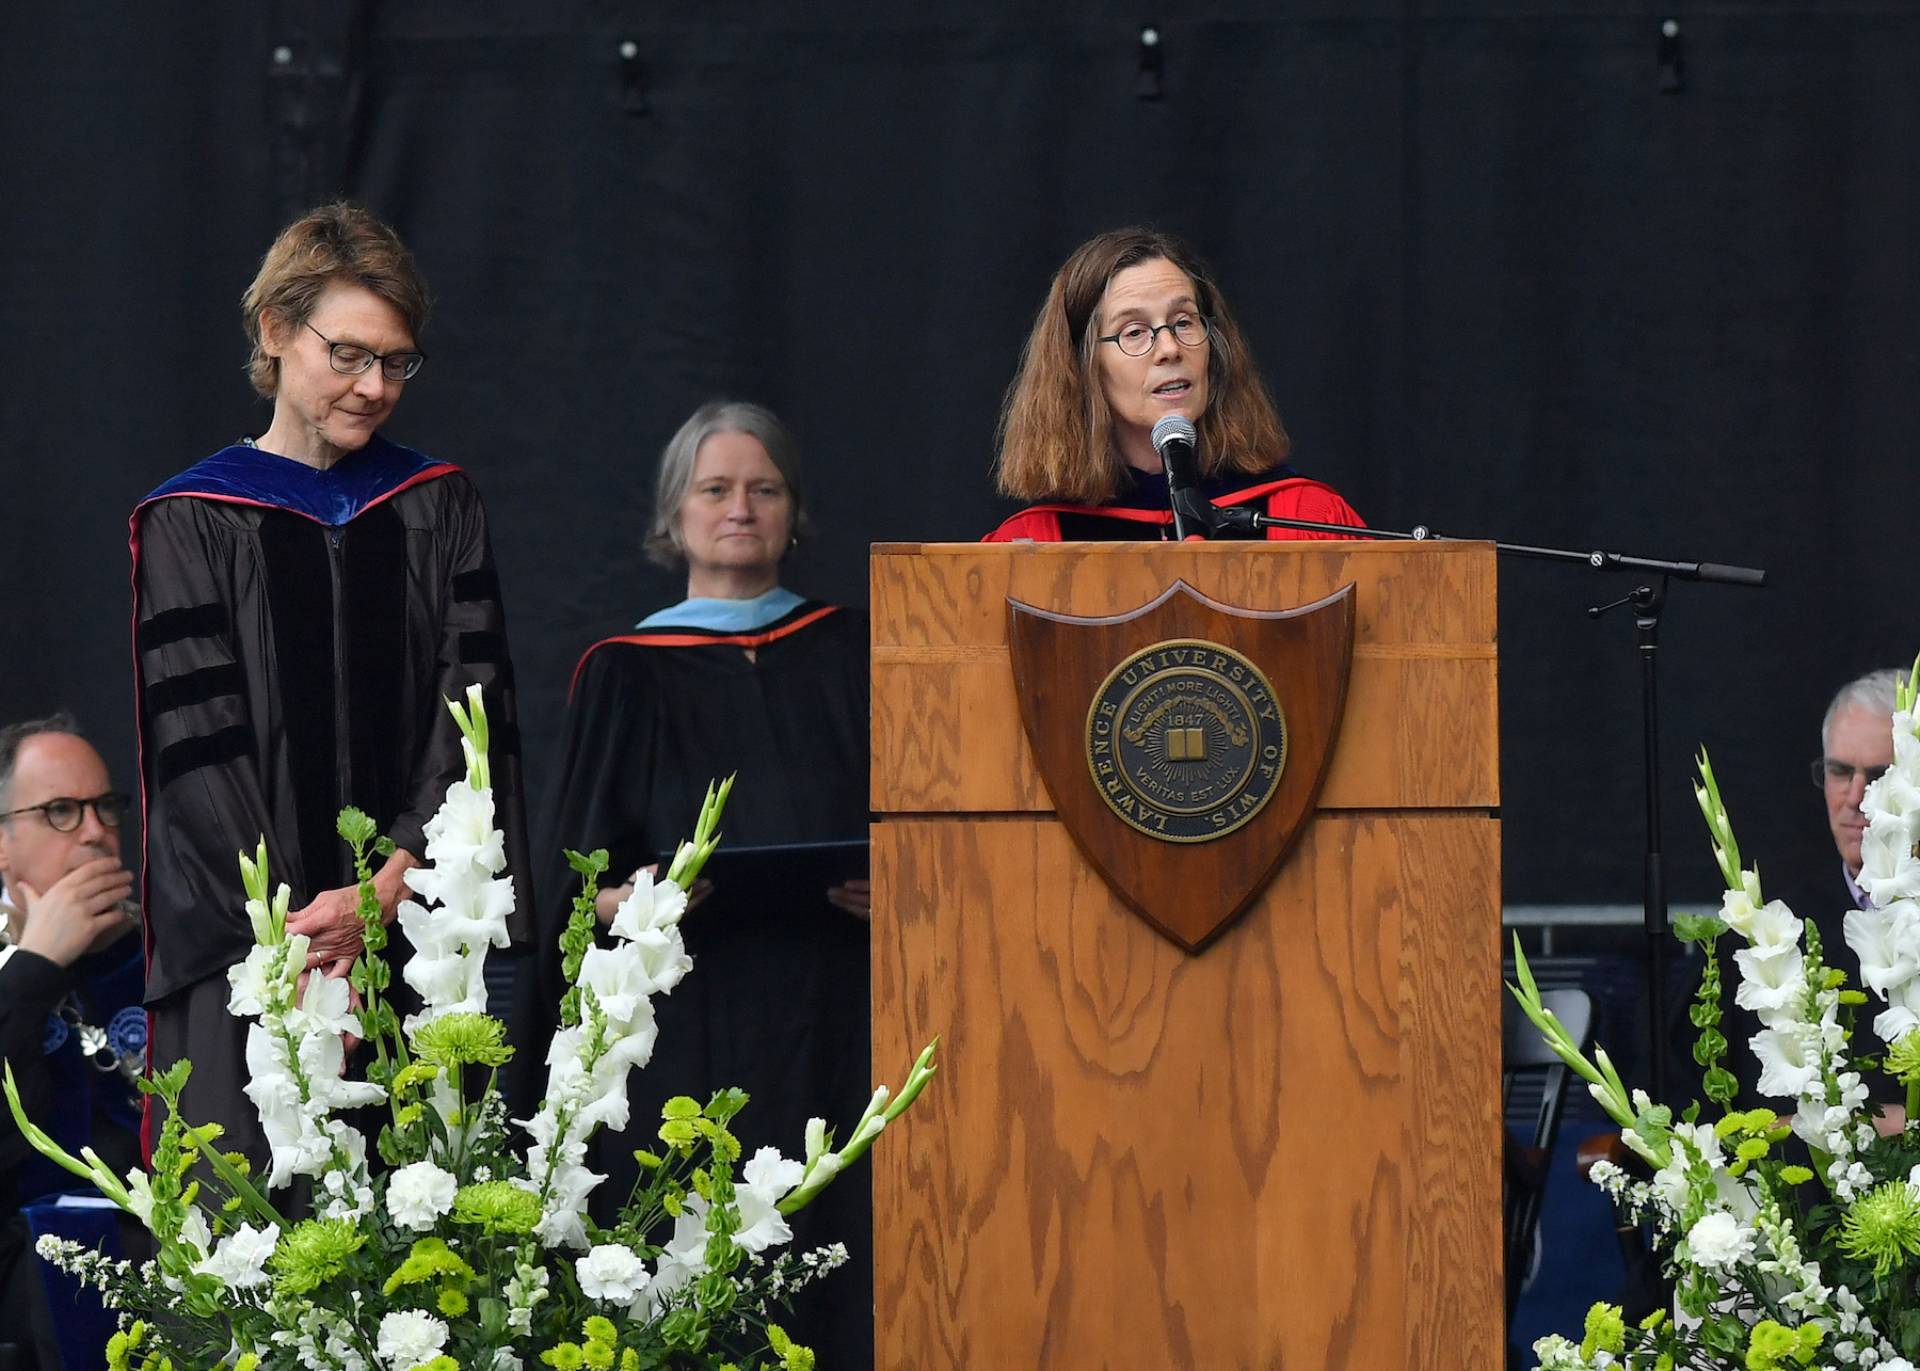 Provost and Dean of Faculty Catherine Kodat announcing faculty award for Marcia Bjornerud during Commencement ceremony.